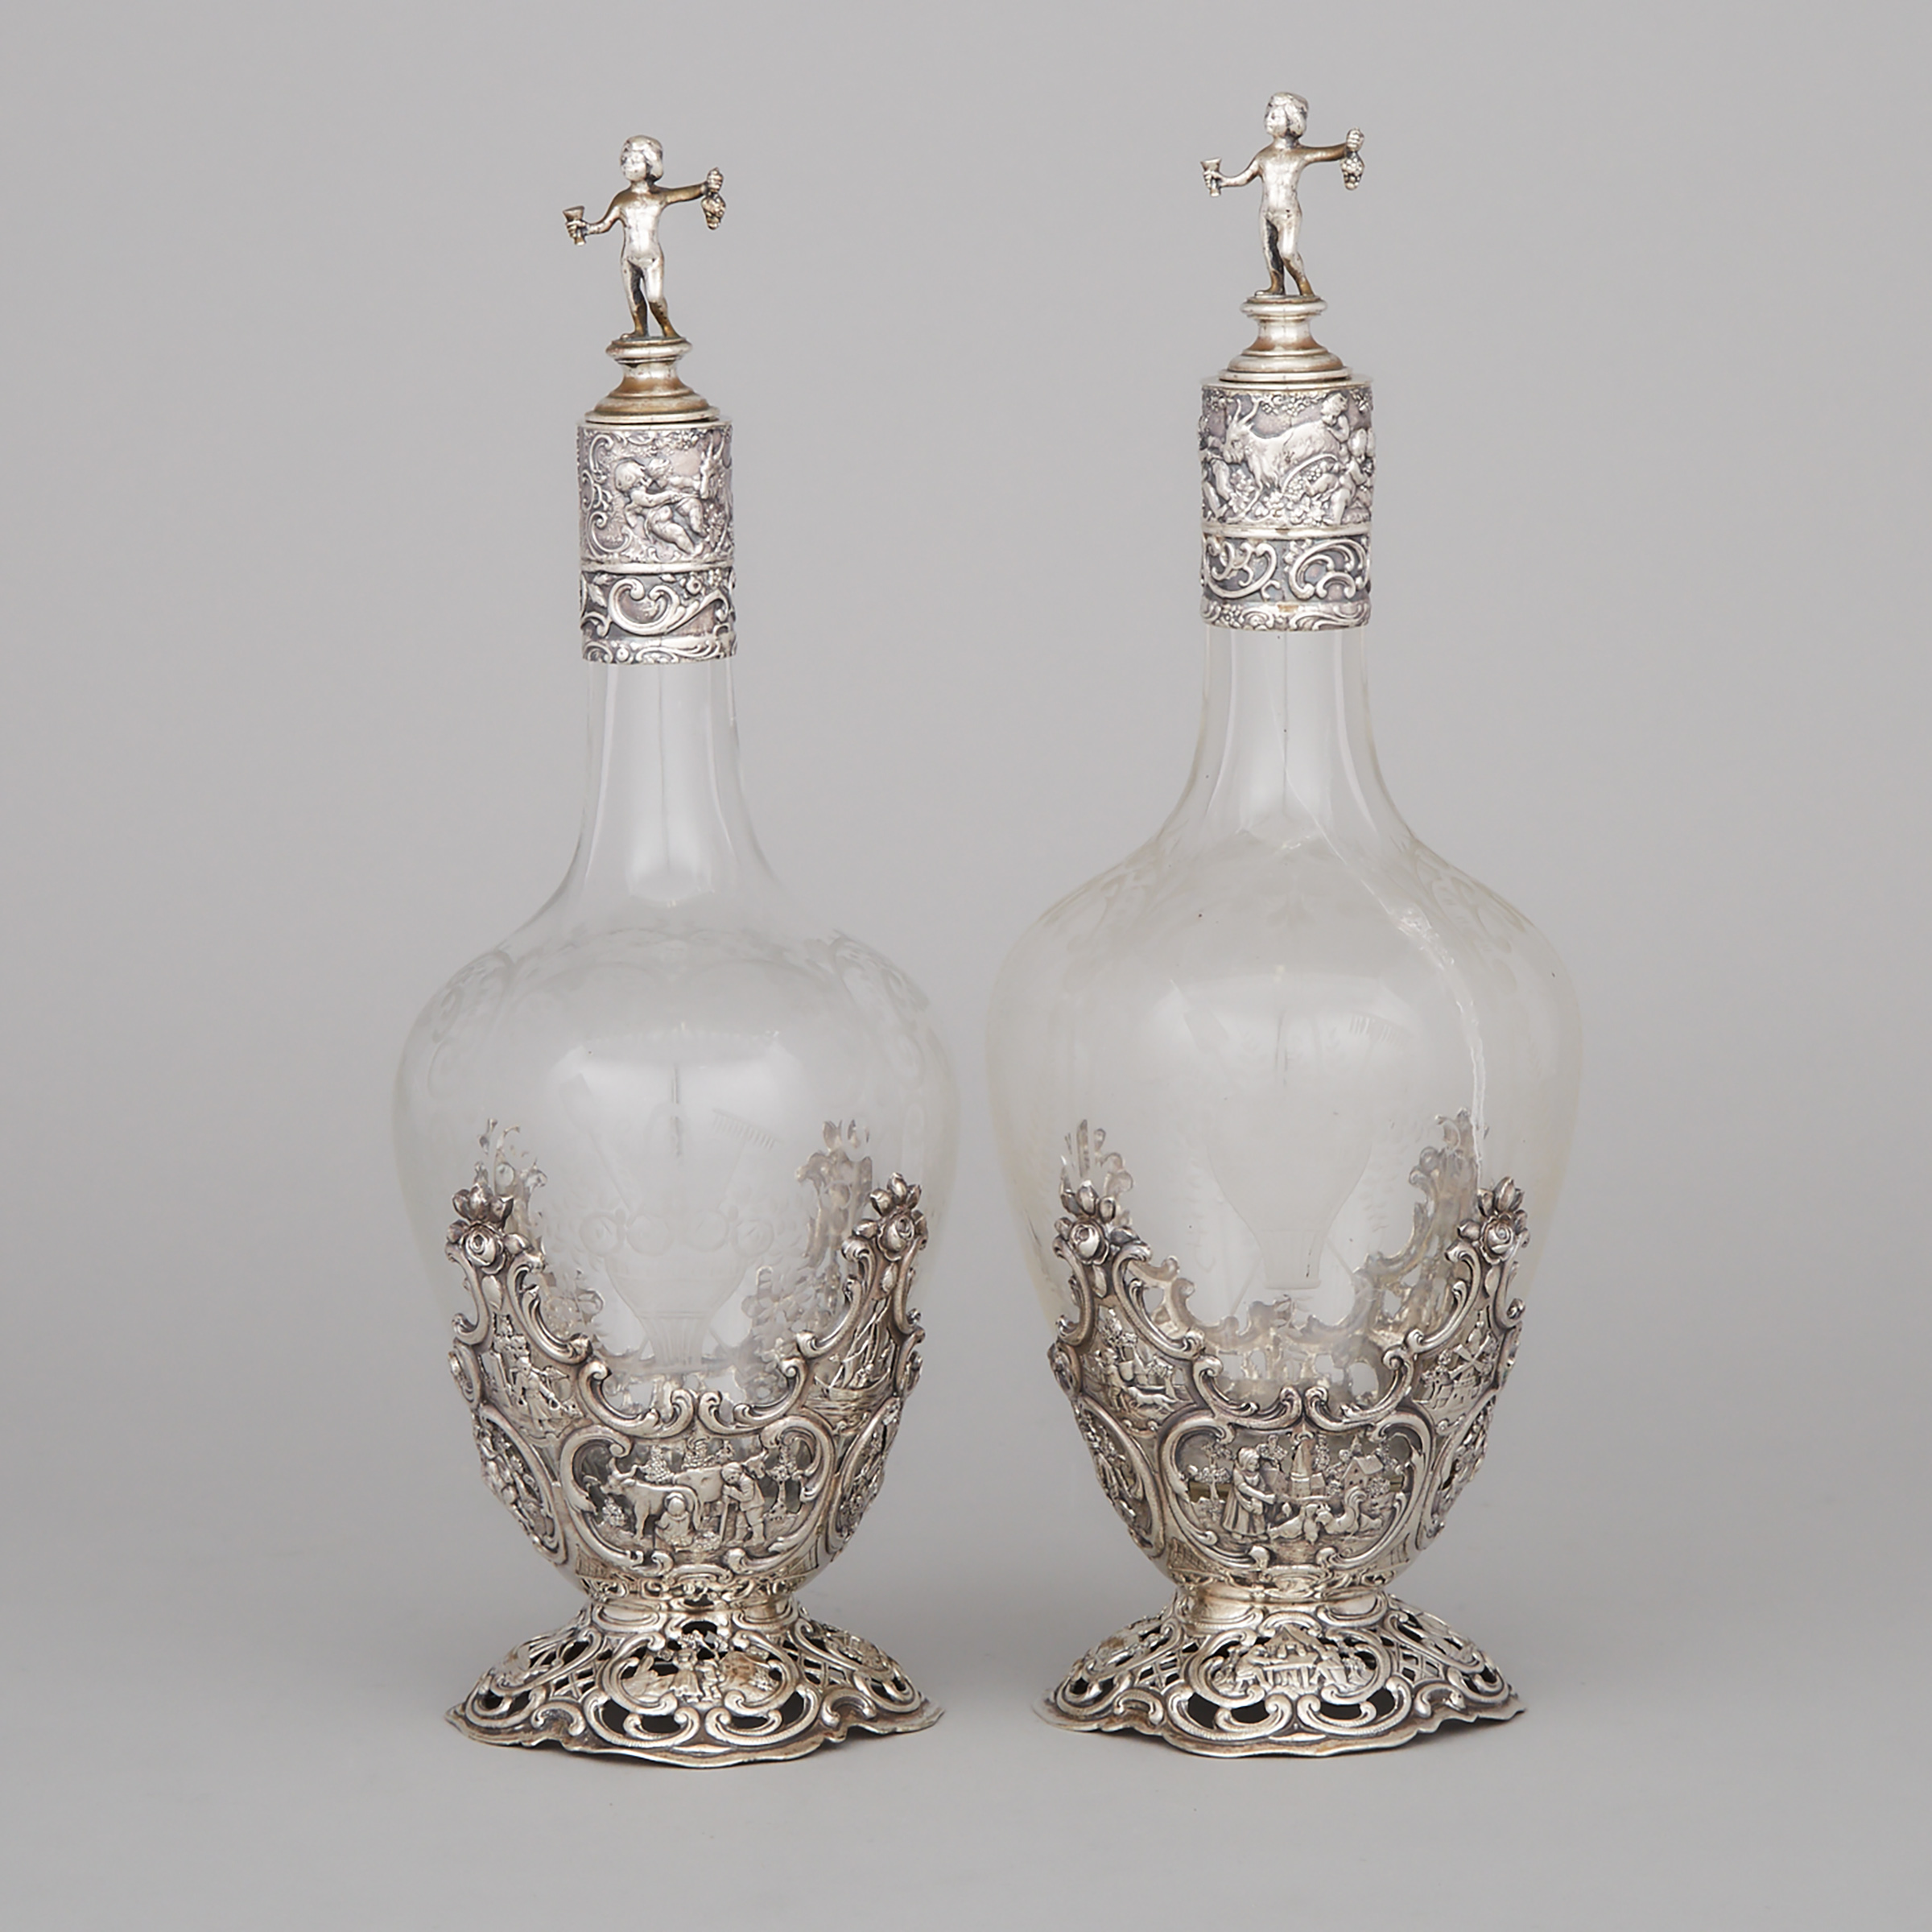 Pair of German Silver Mounted Etched Glass Decanters, probably J.D. Schleissner & Söhne, Hanau, c.1900